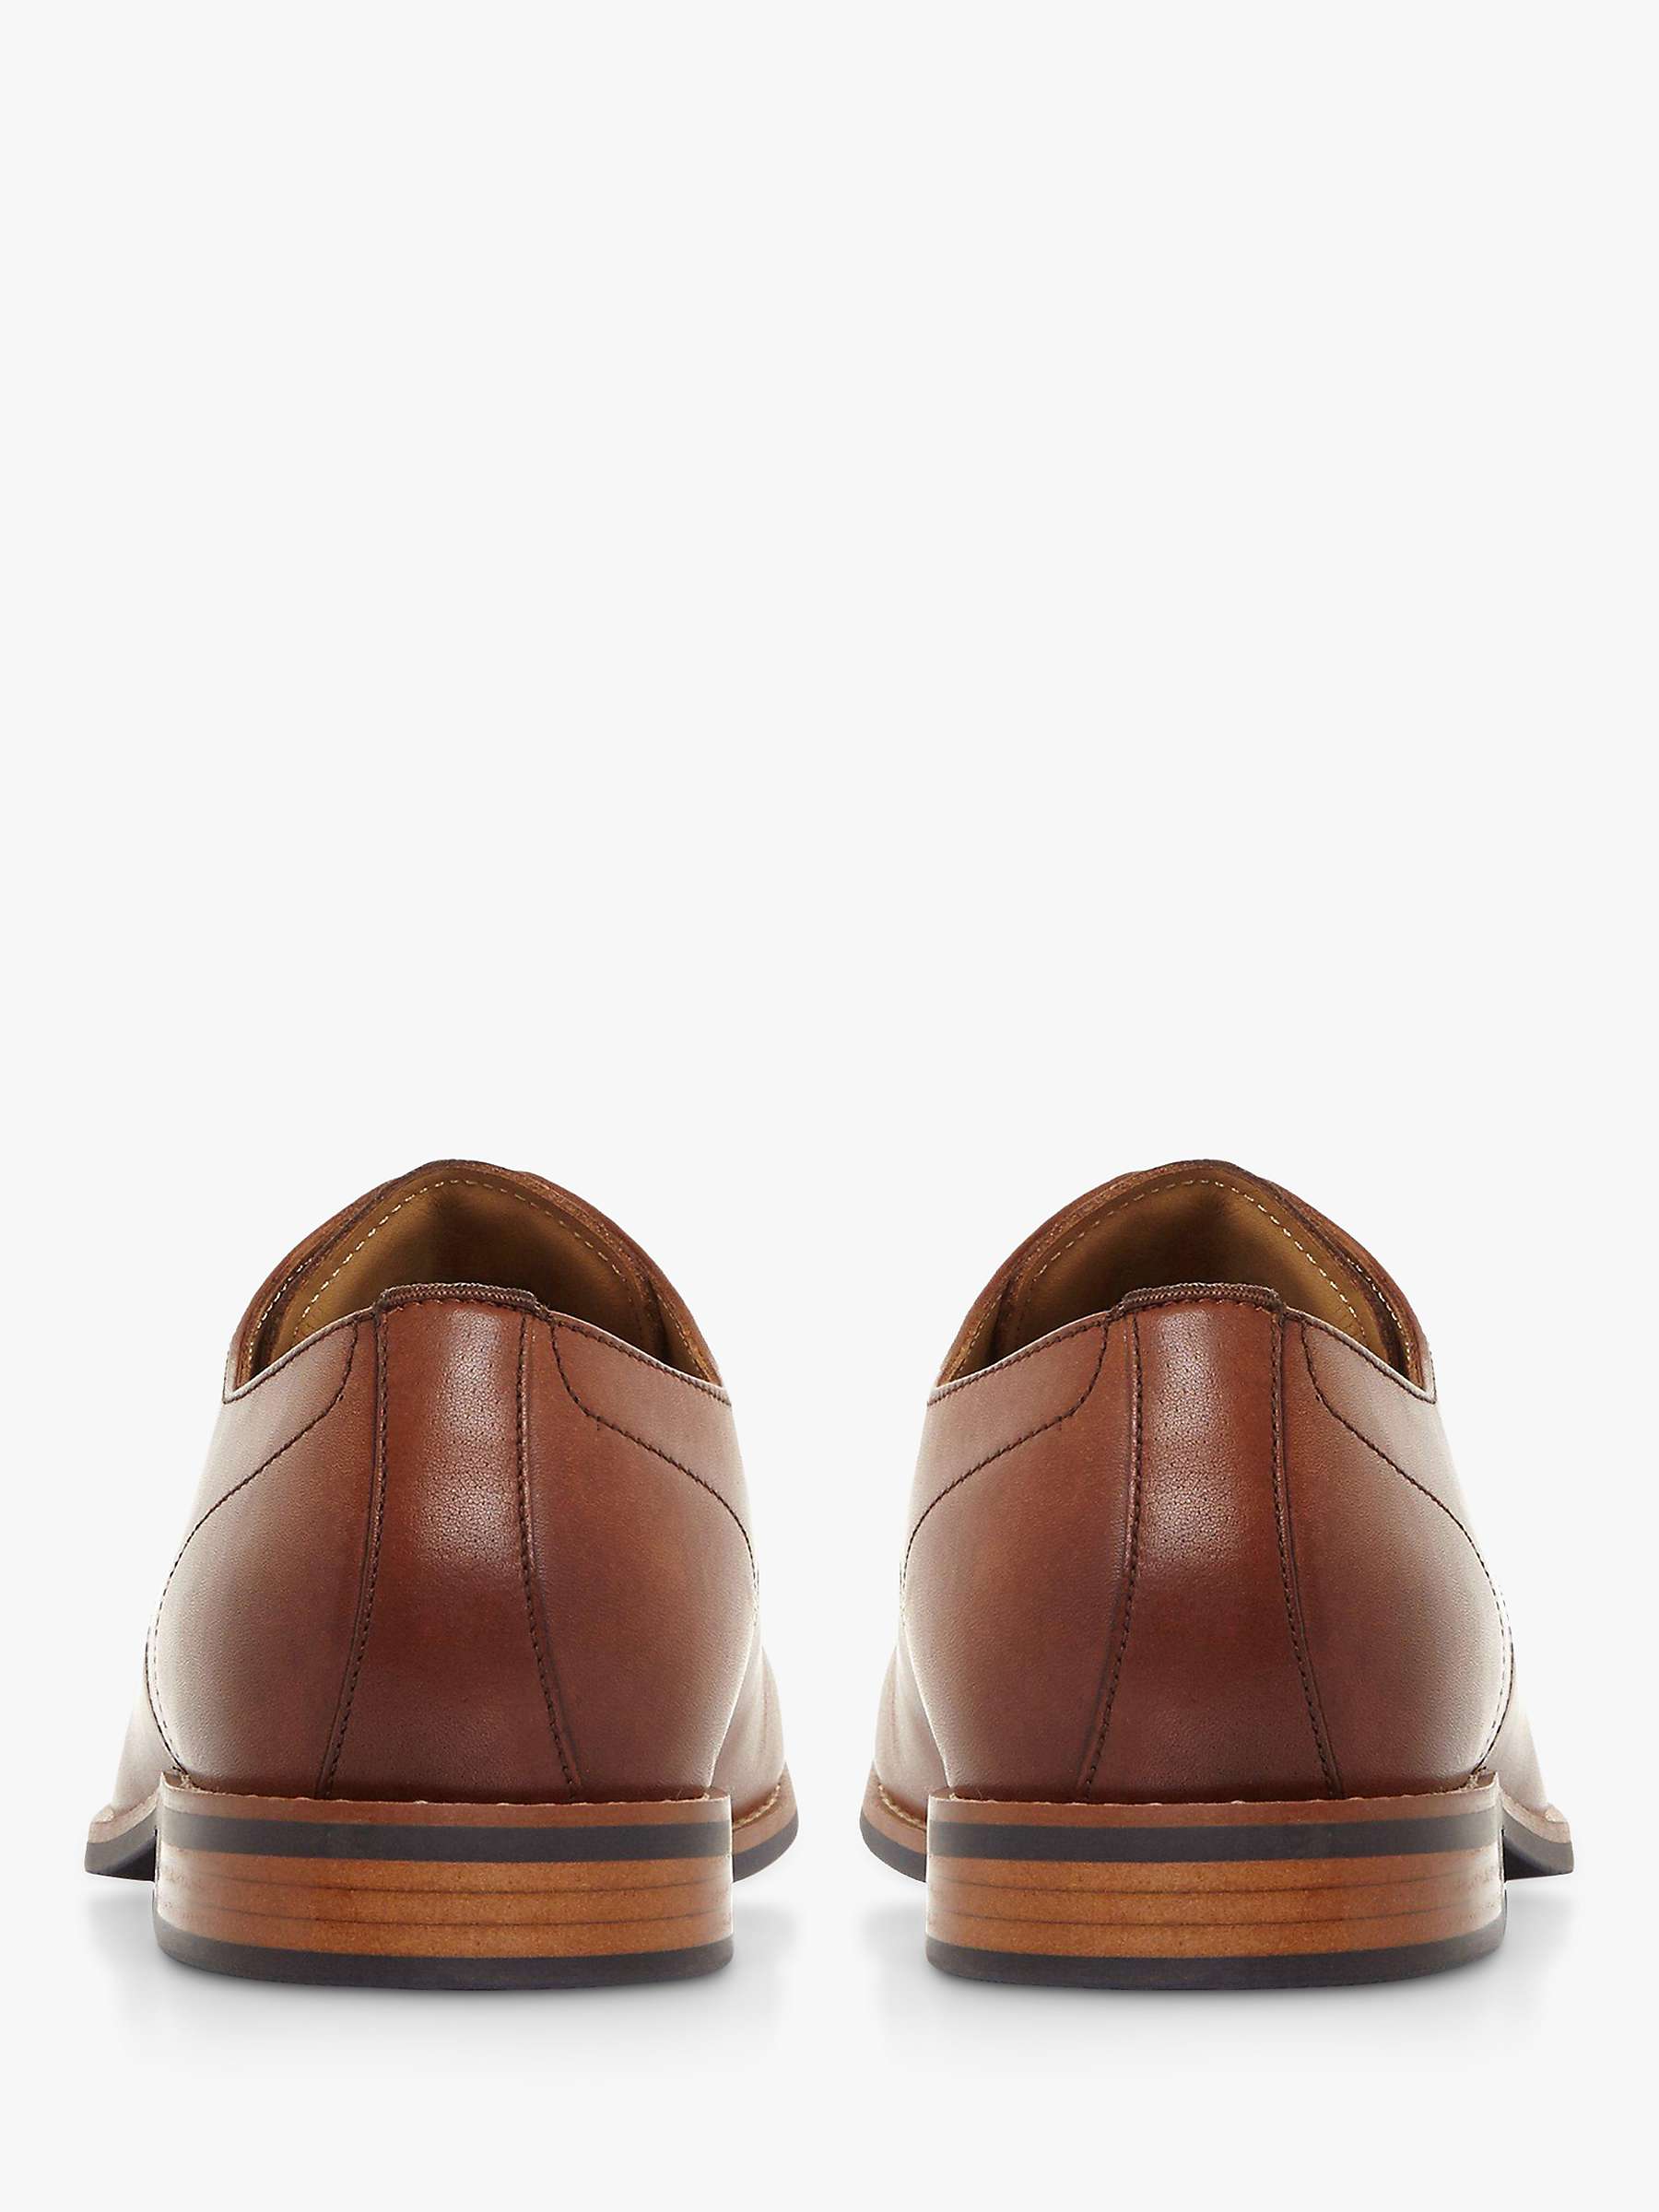 Buy Dune Suffolks Leather Gibson Shoes Online at johnlewis.com